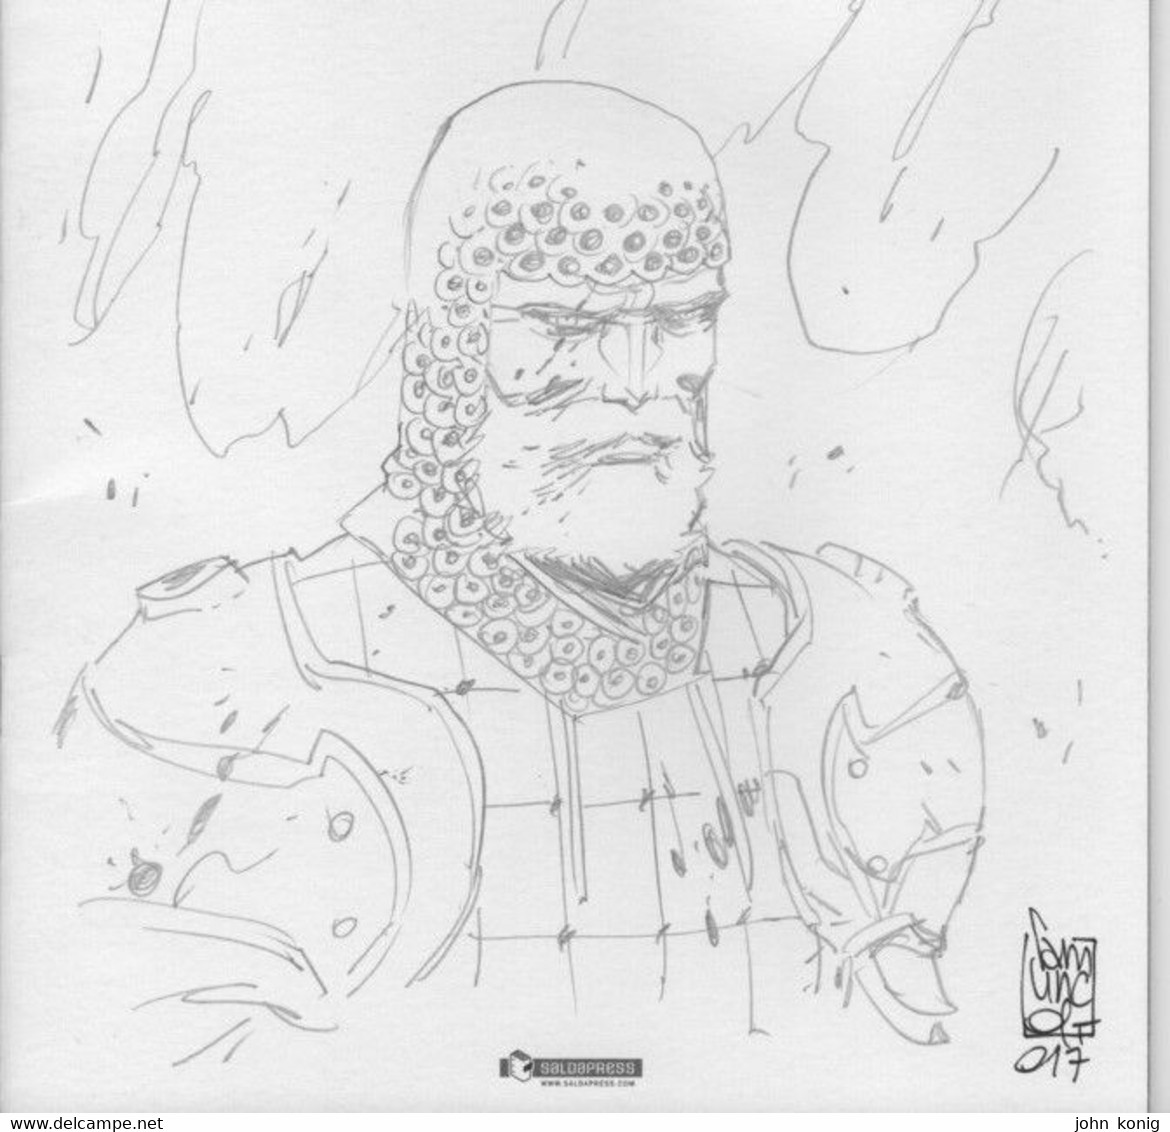 Green Valley Variant Cover With Sketch (pencil) By Giuseppe Camuncoli - Tavole Originali